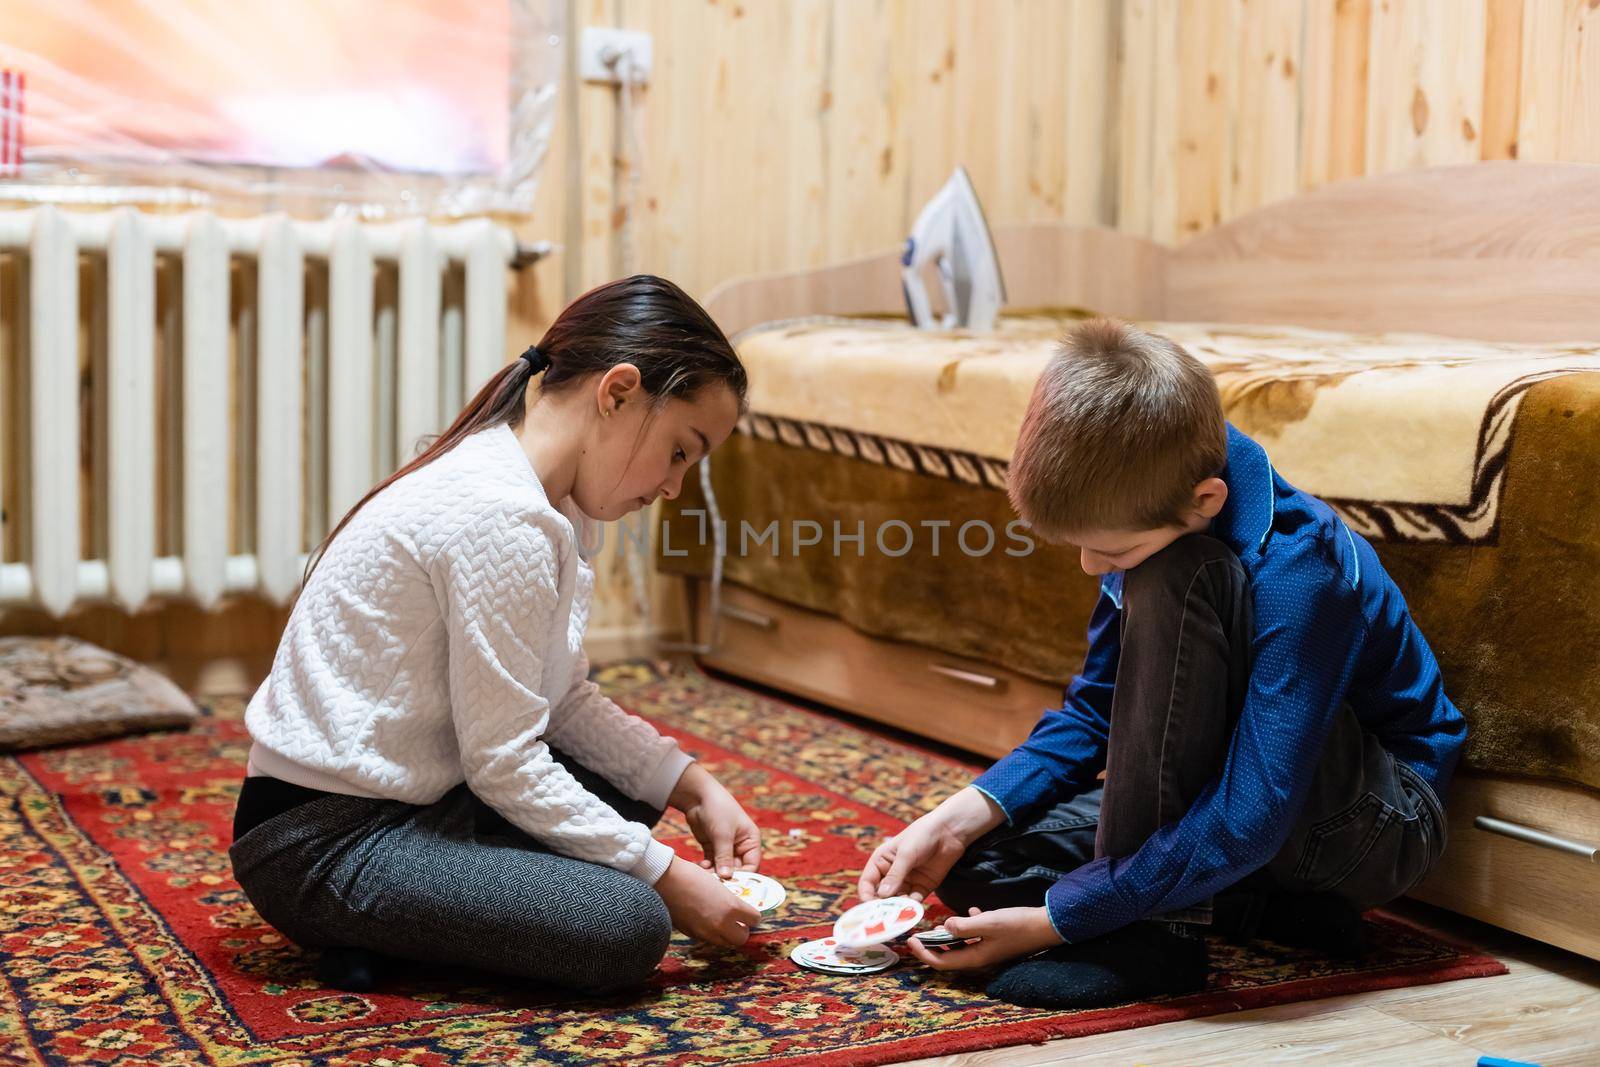 Children playing with blocks on the floor - focus on the boy's face by Andelov13